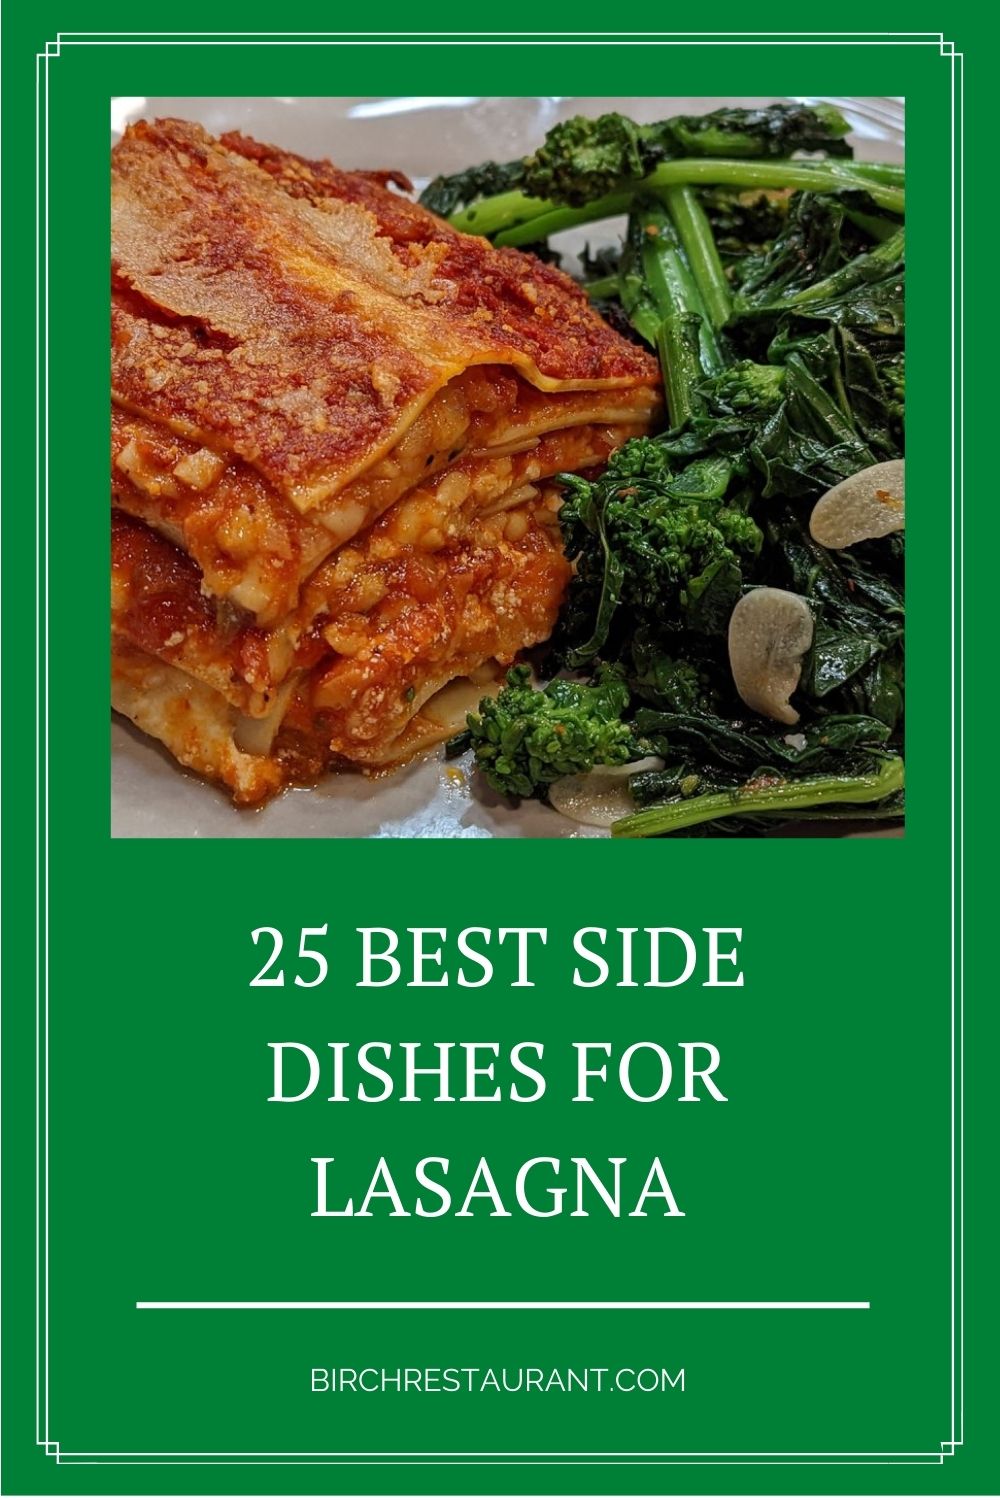 Best Side Dishes for Lasagna